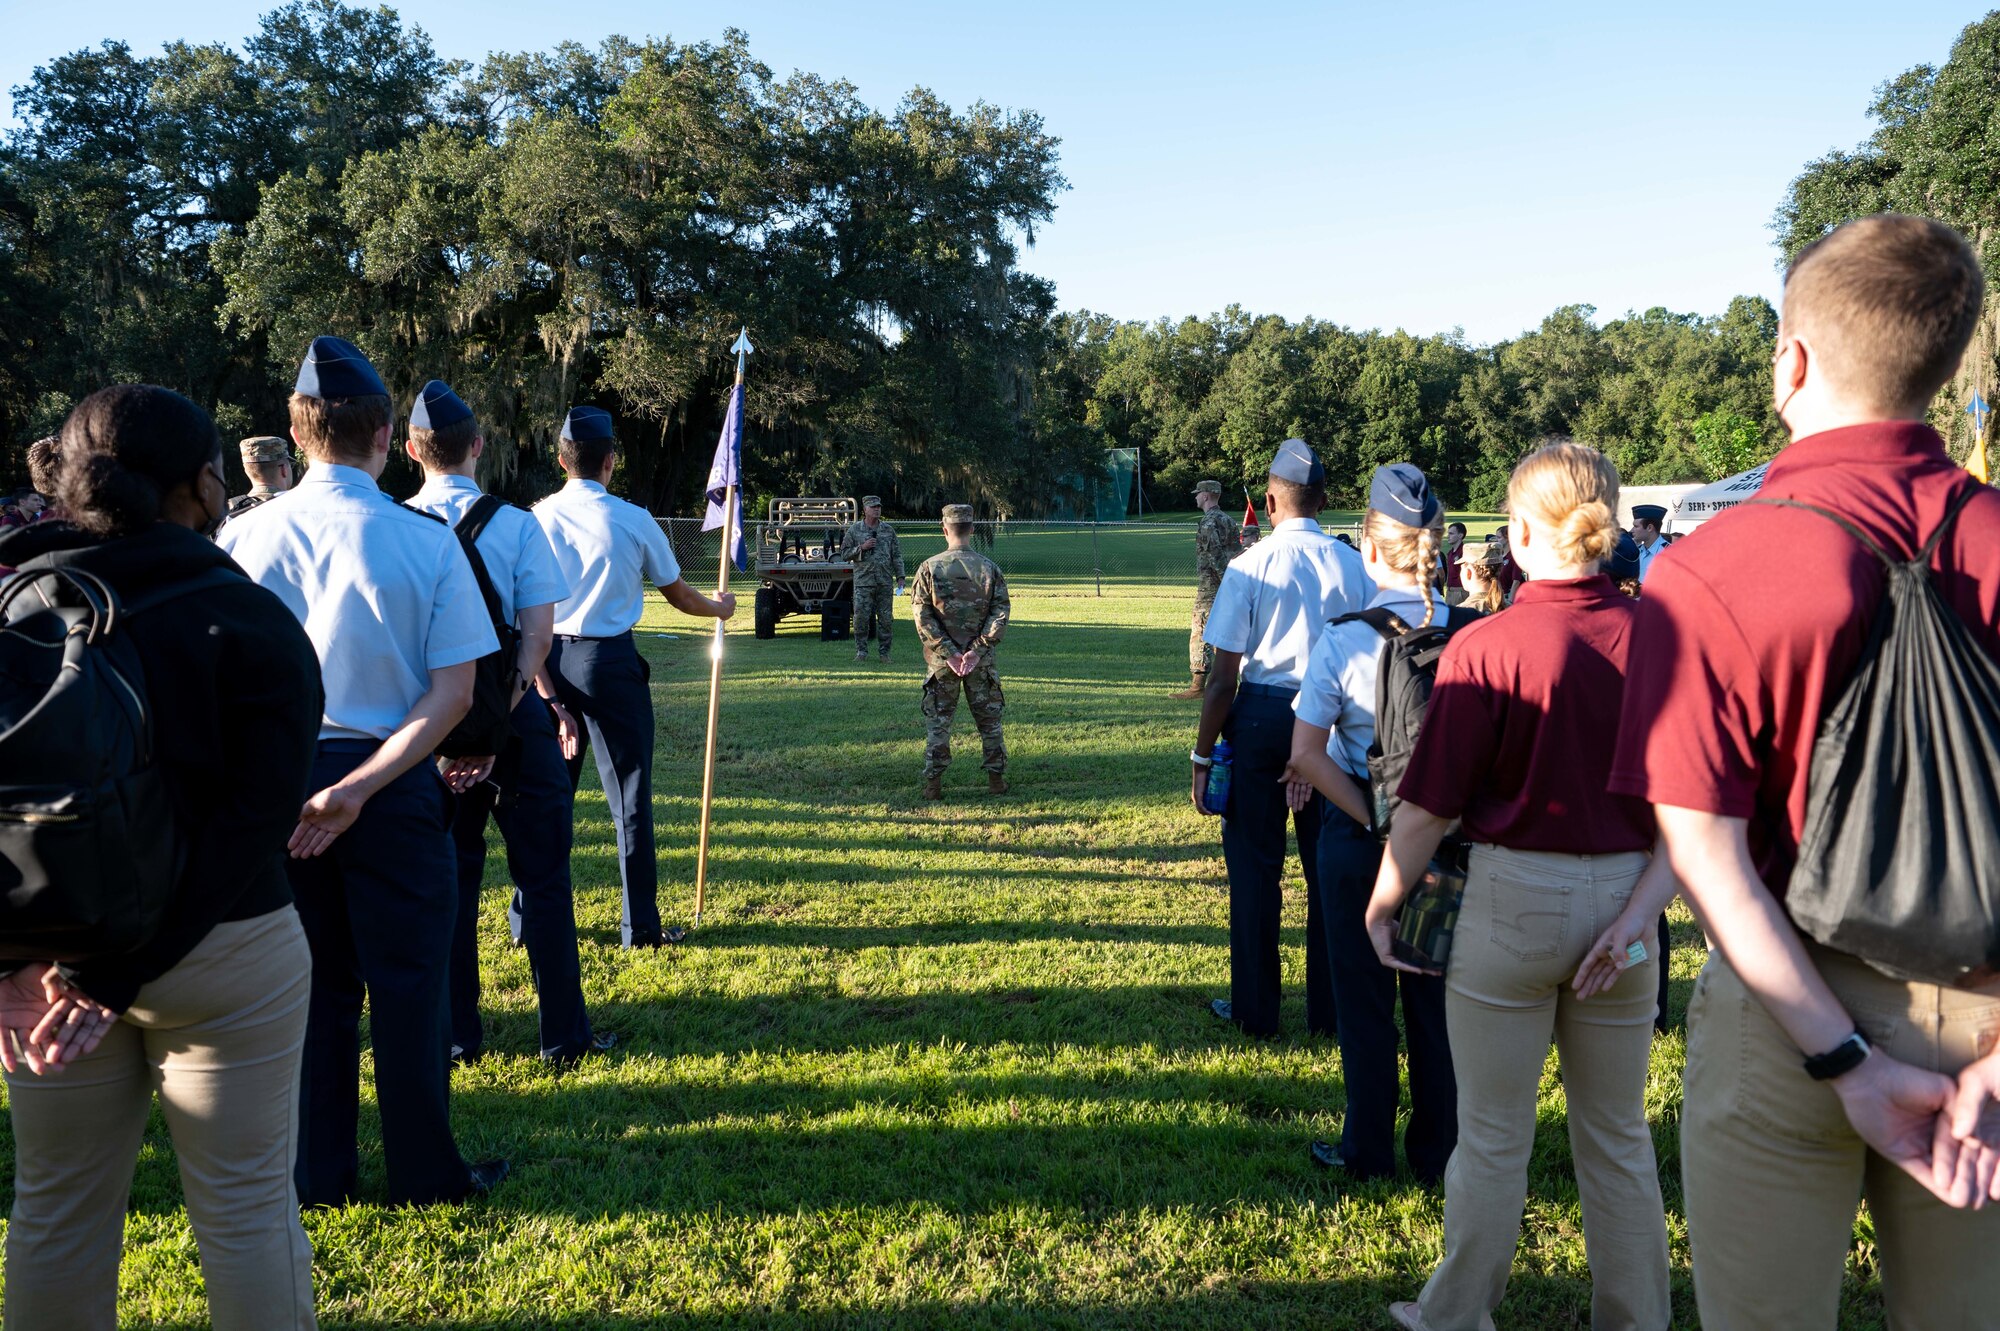 U.S. Air Force Maj. Gen. Eric Hill, Air Force Special Operations Command deputy commander, speaks to ROTC cadets at Florida State University and Florida A&M University during an event Sept. 23, 2021. Hill spoke about diversity, inclusion and the type of leaders needed for the future of the force. (U.S. Air Force photo by Staff Sgt. Rito Smith)